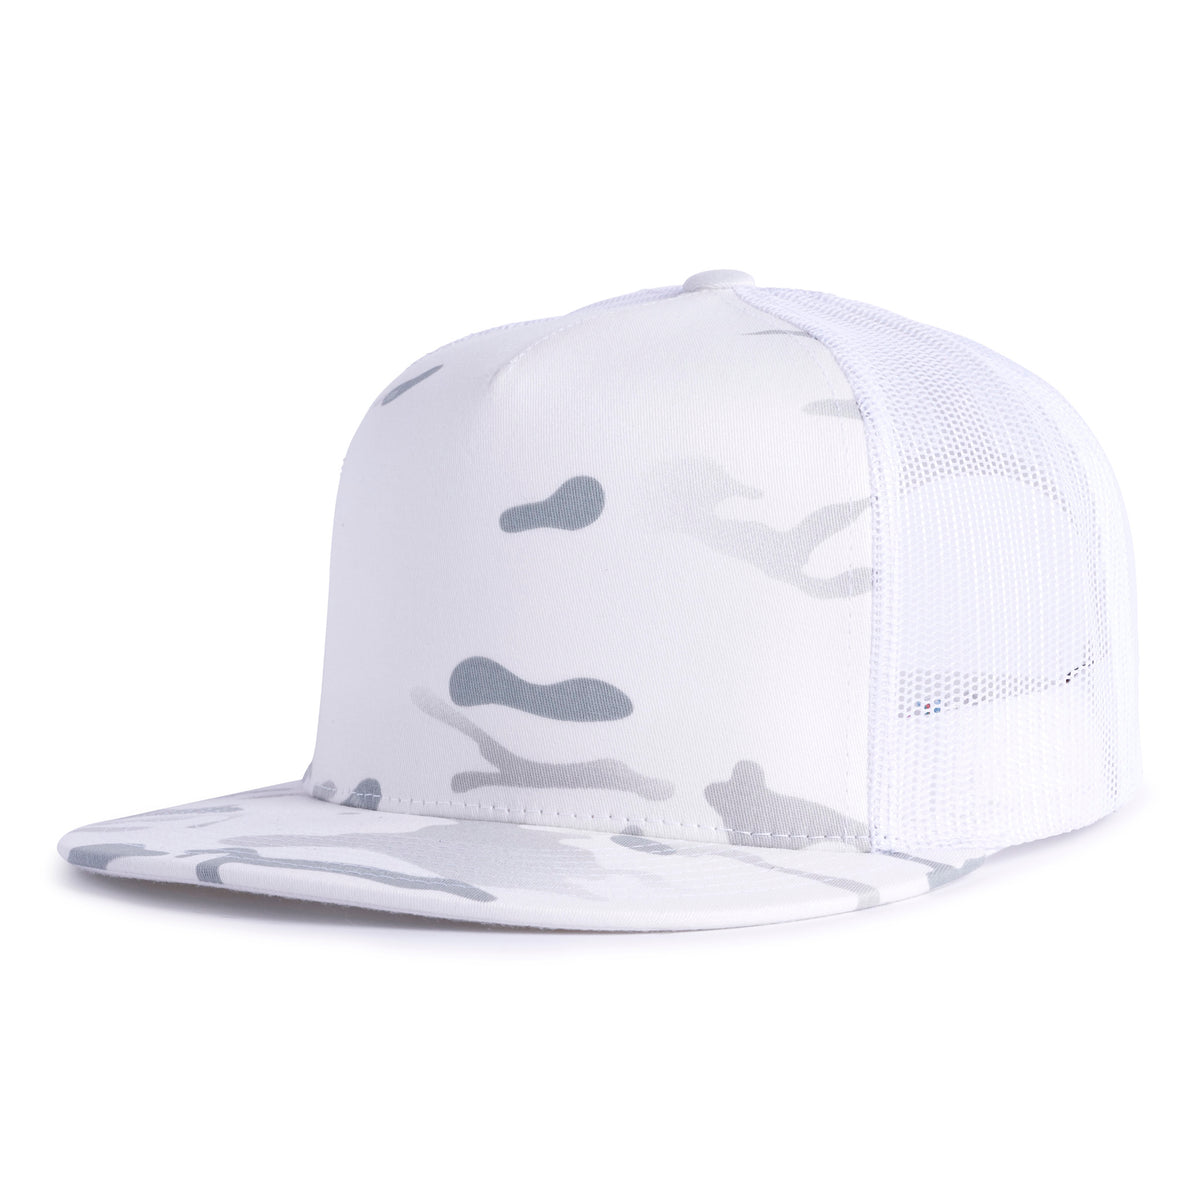 White grey trucker hat with a flat bill, 5-panels, structured high crown, white mesh back, and a snapback closure from Tailgate Hats.